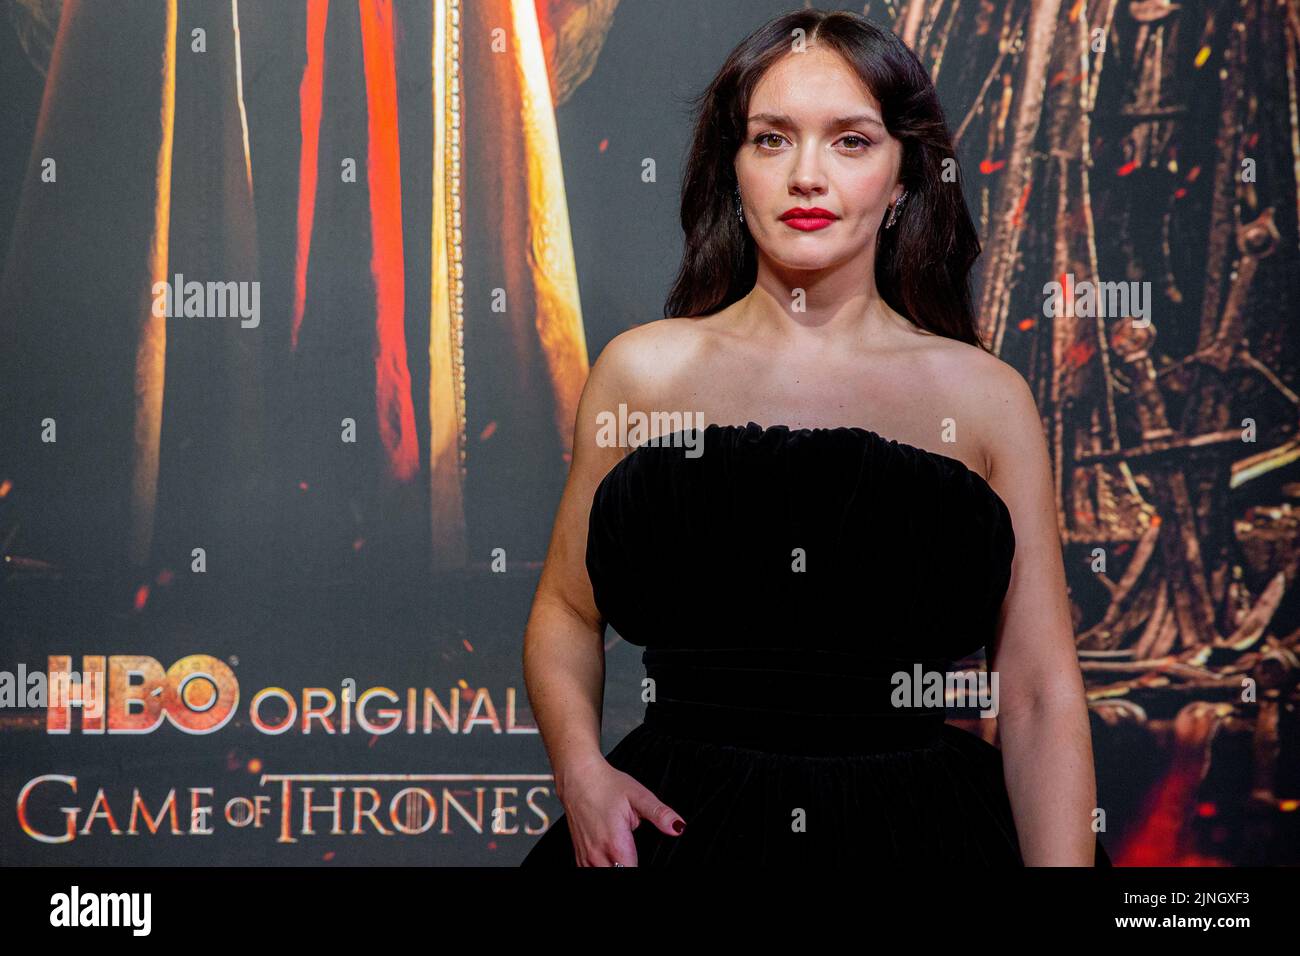 2022-08-11 20:46:16 AMSTERDAM - Olivia Cooke of the cast of the new HBO Max series House of the Dragon during its European premiere. ANP WESLEY DE WIT netherlands out - belgium out Stock Photo